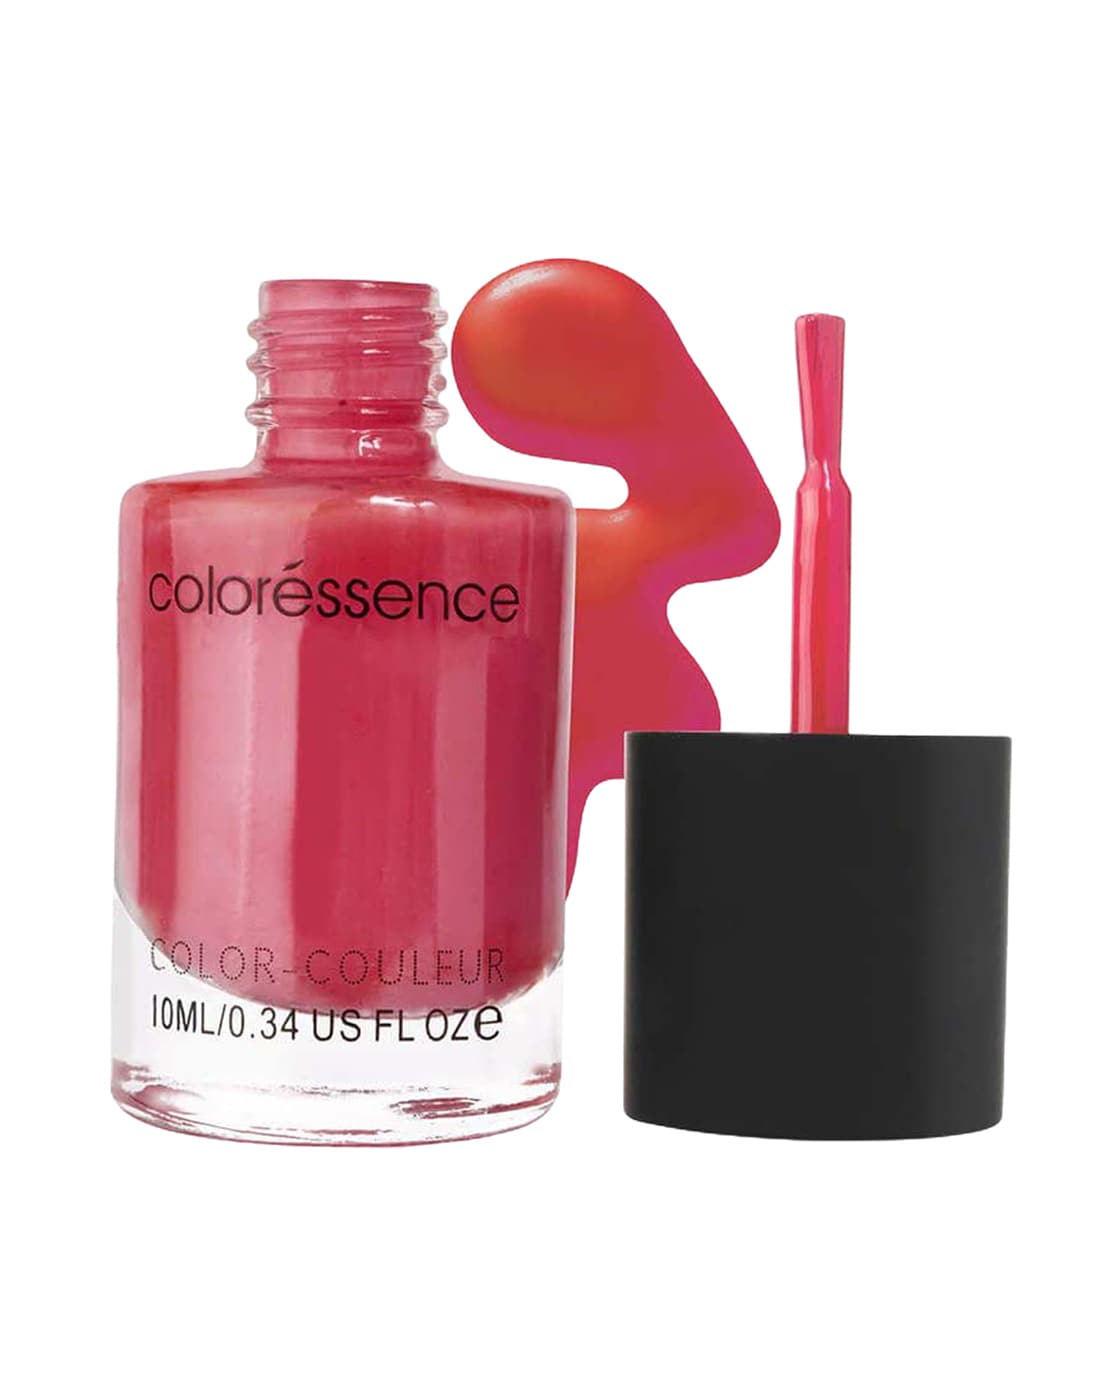 Coloressence Dazzle Diva Matte Finish Nail Paint (Orange Opal) Price - Buy  Online at ₹119 in India